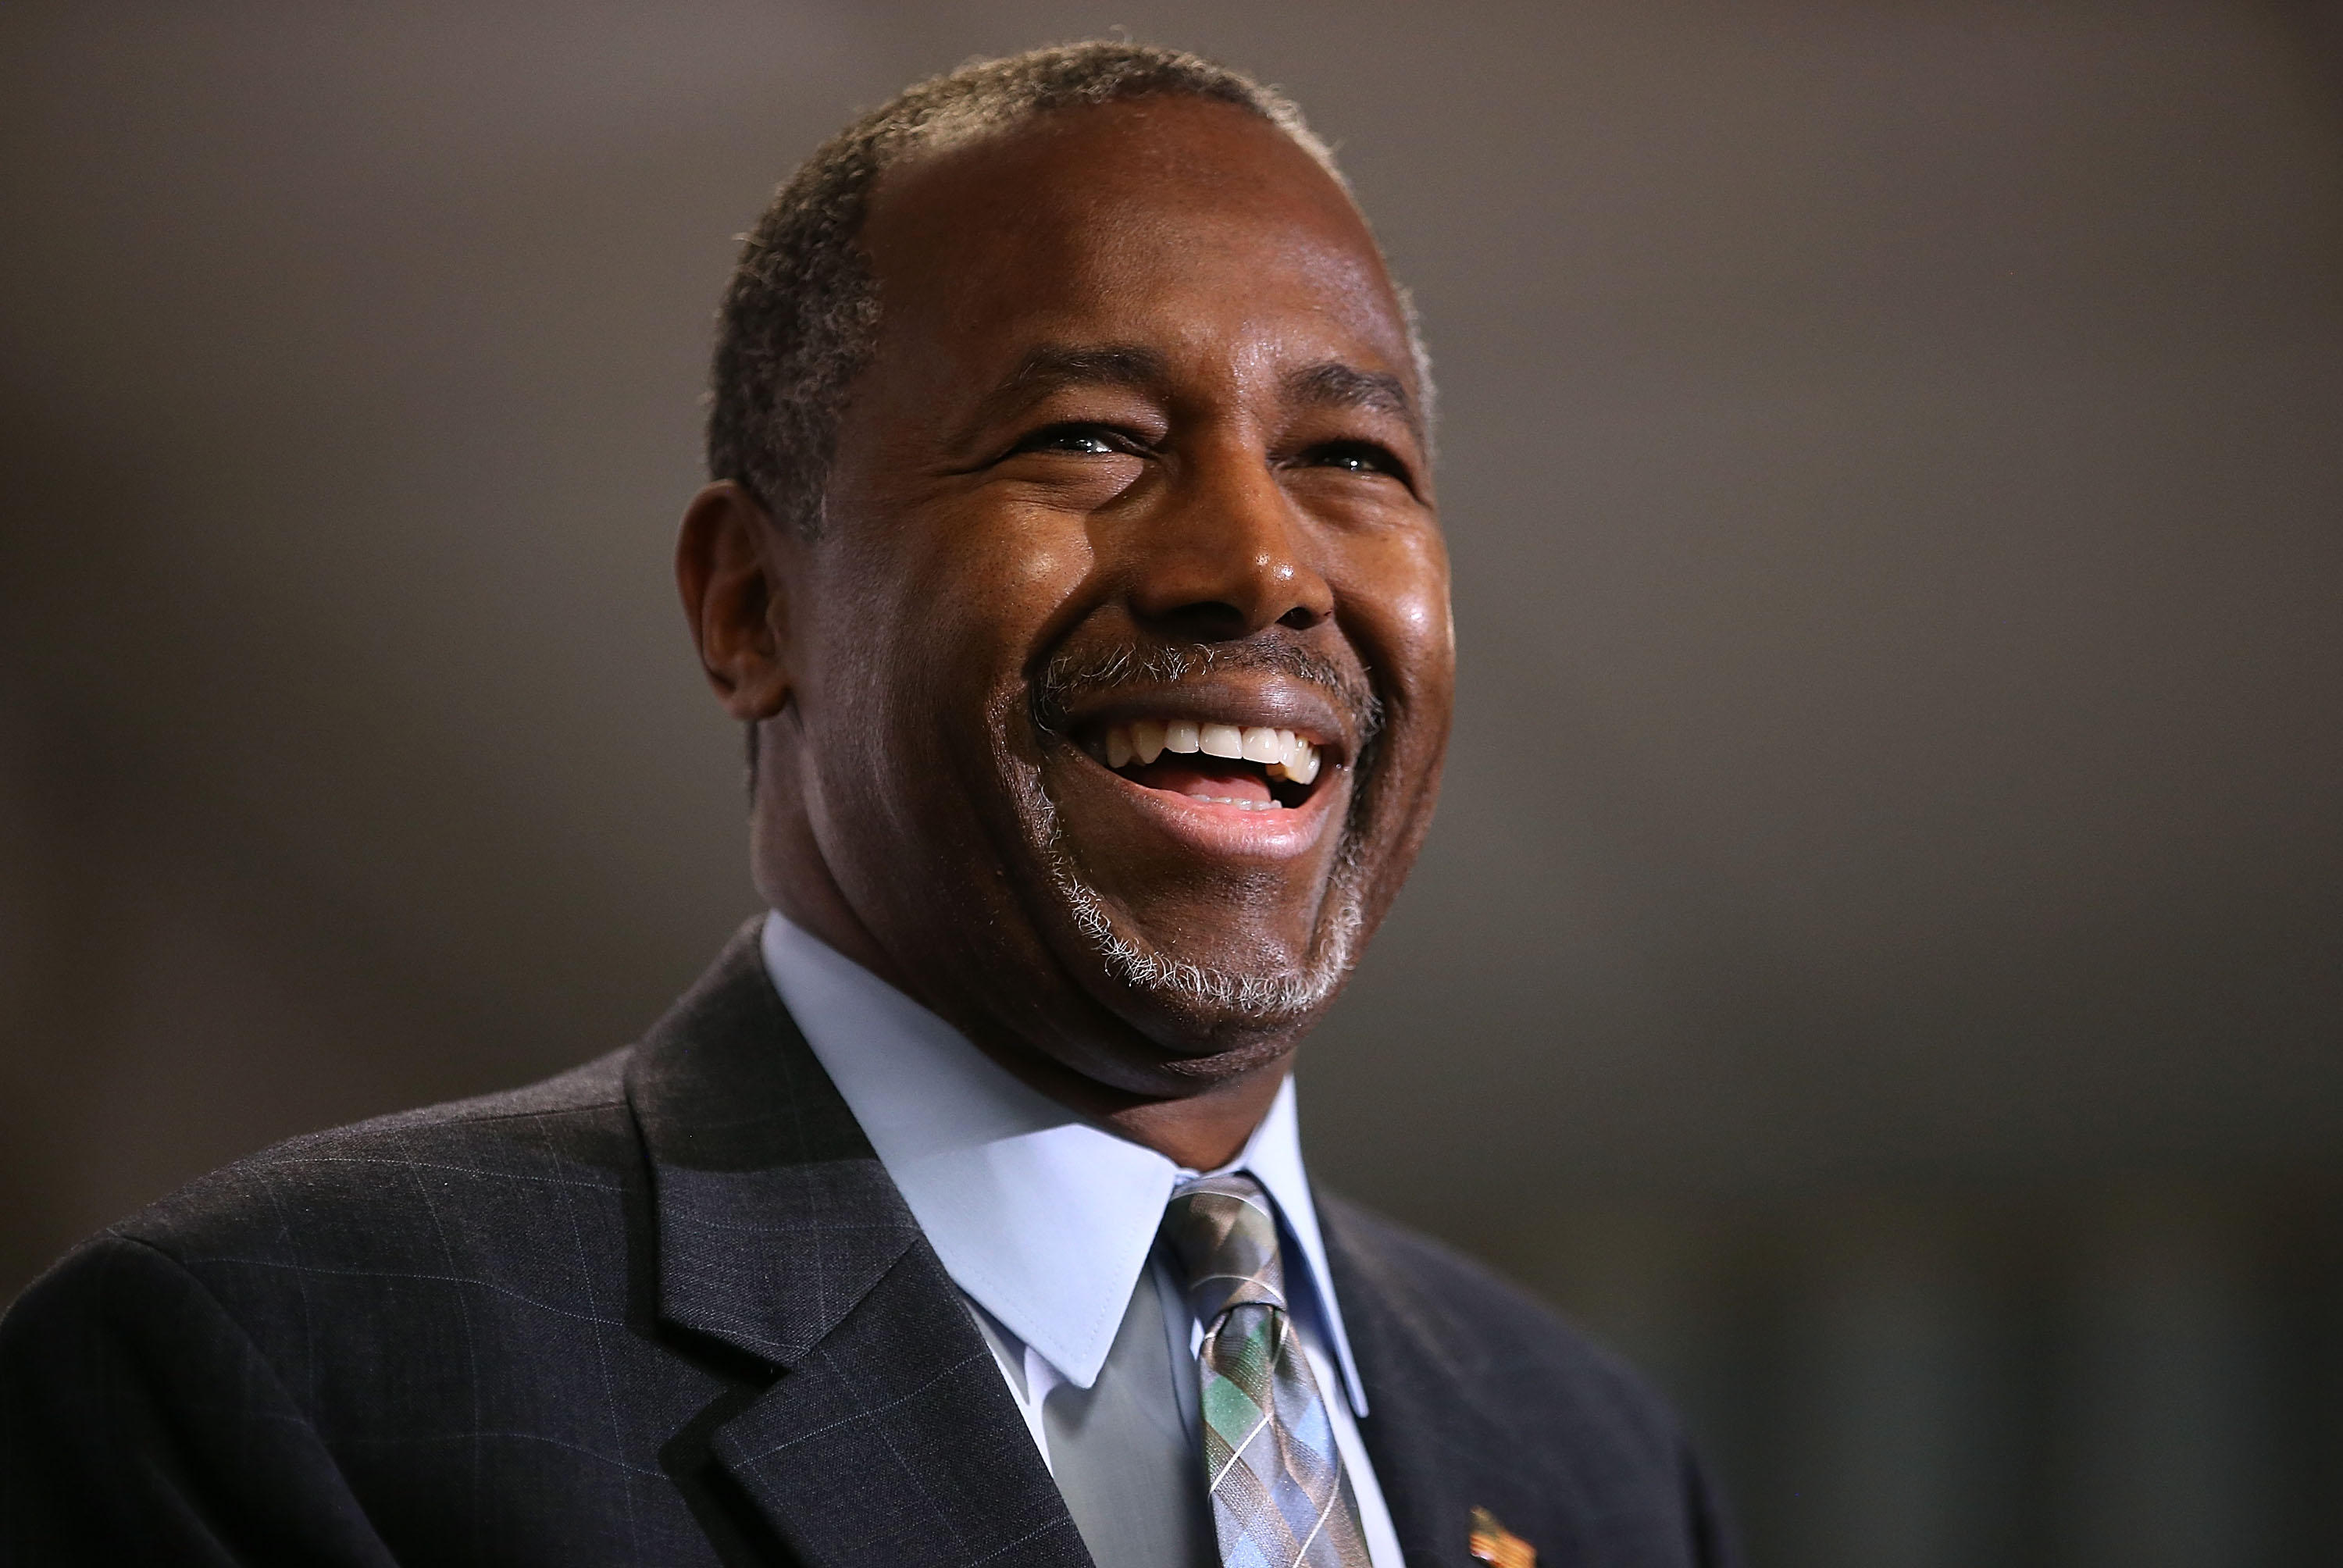 Ben Carson expands on comment about poverty and "state of mind" CBS News